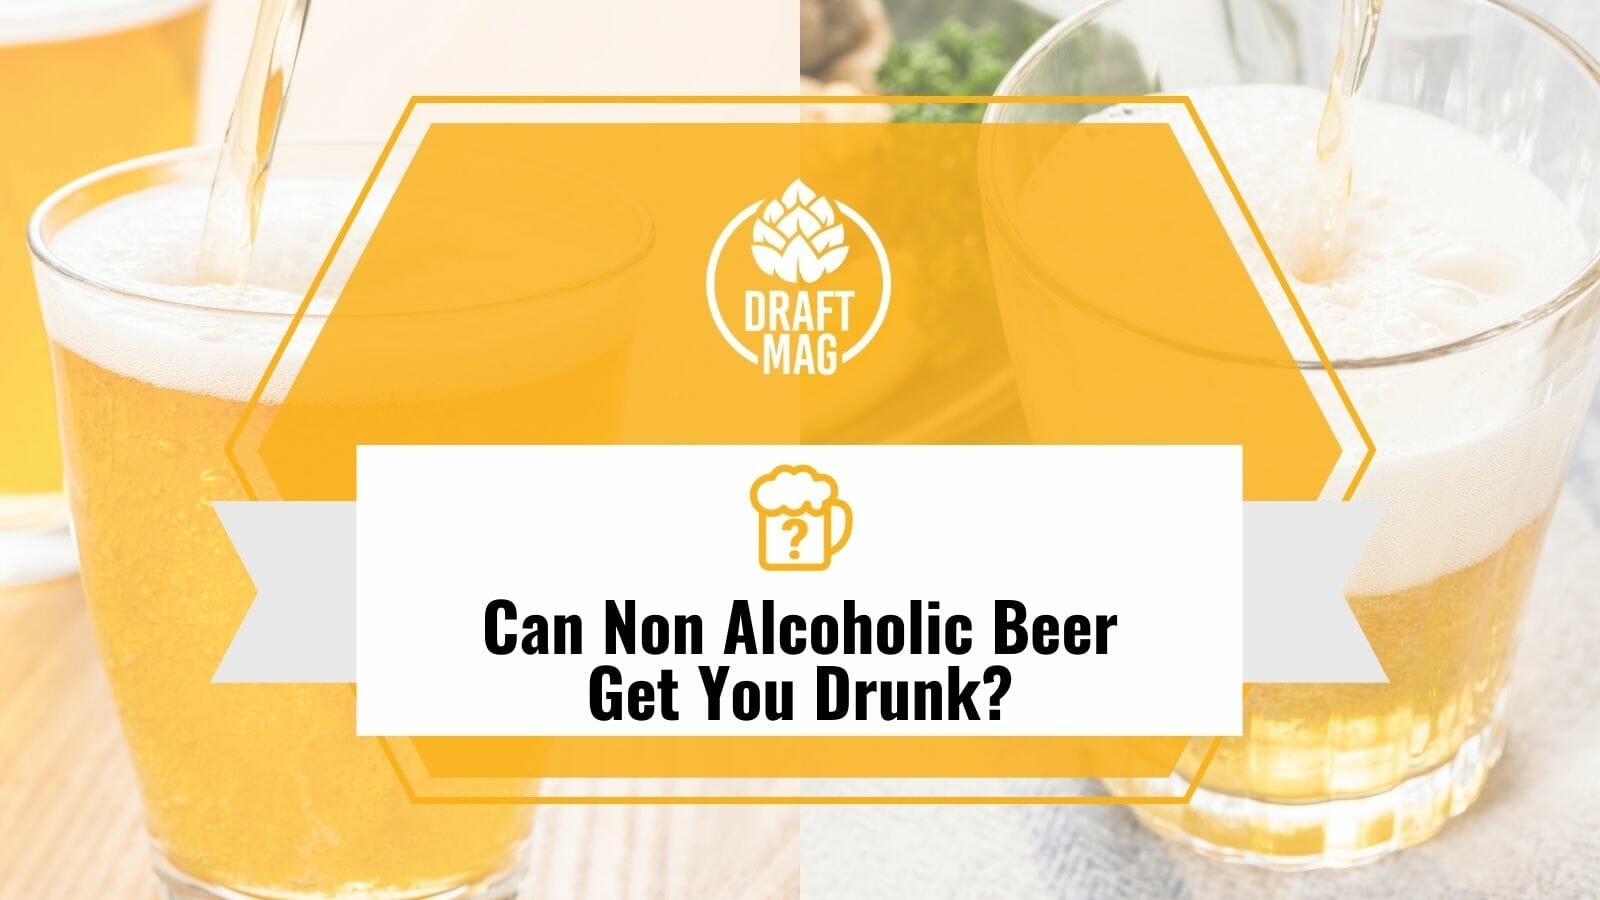 Can Non Alcoholic Beer Get You Drunk